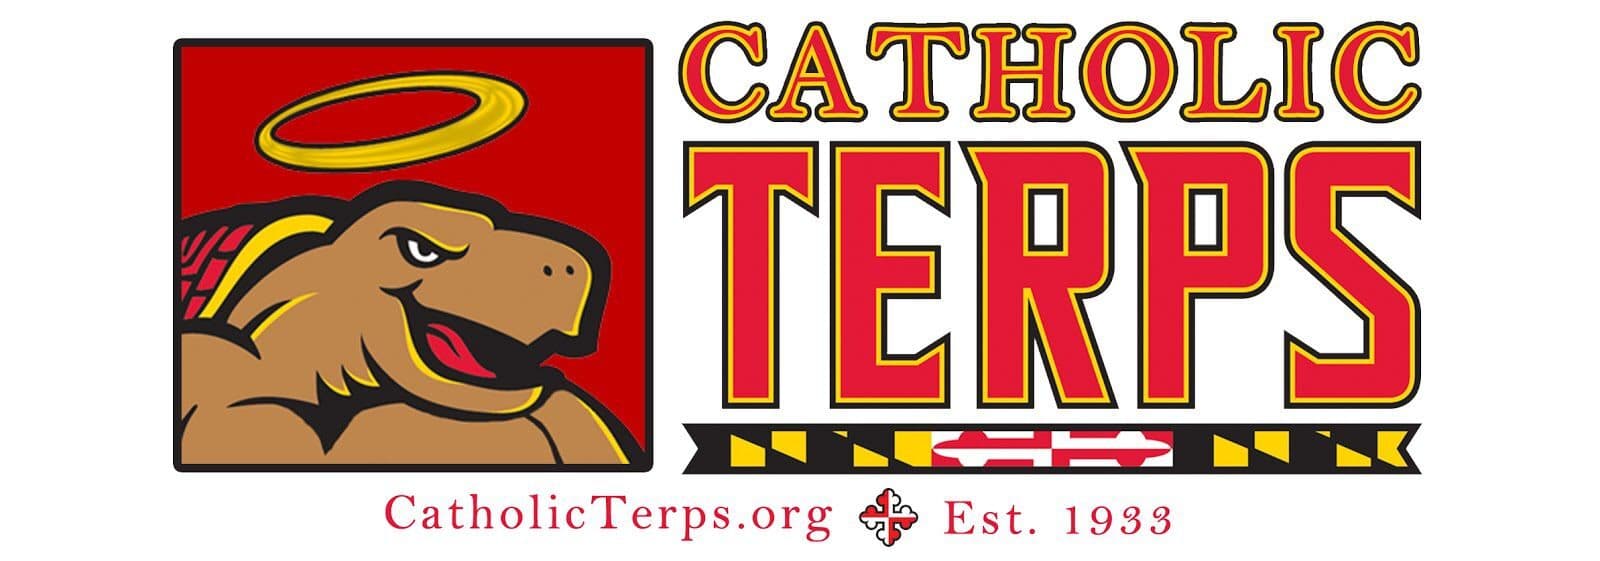 Catholic Terps.org est. 1933 - Testudo with a halo next to the words Catholic Terps.